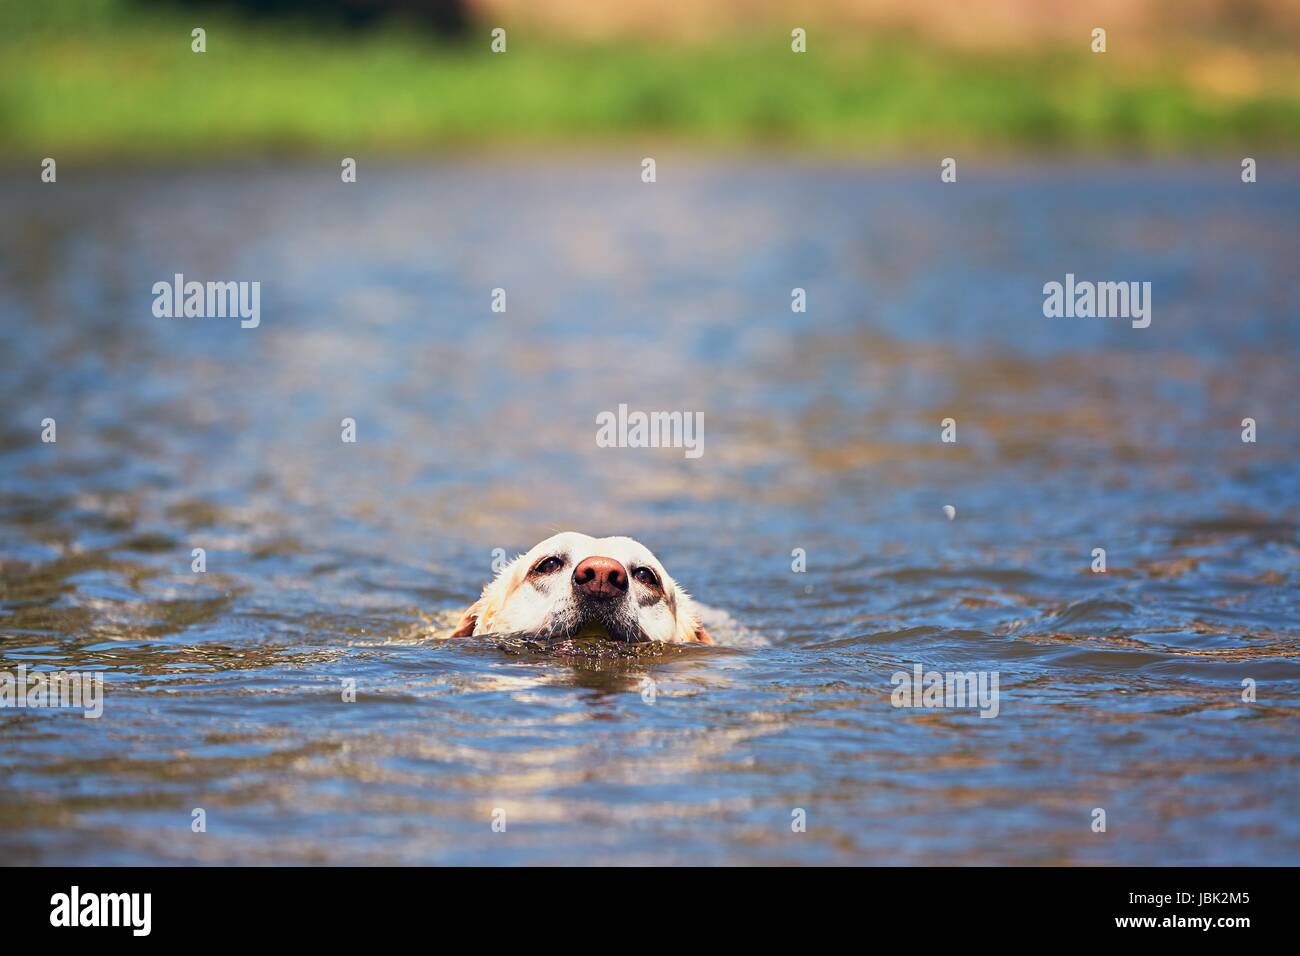 Summer time with dog. Labrador retriever is swimming in the river. Stock Photo